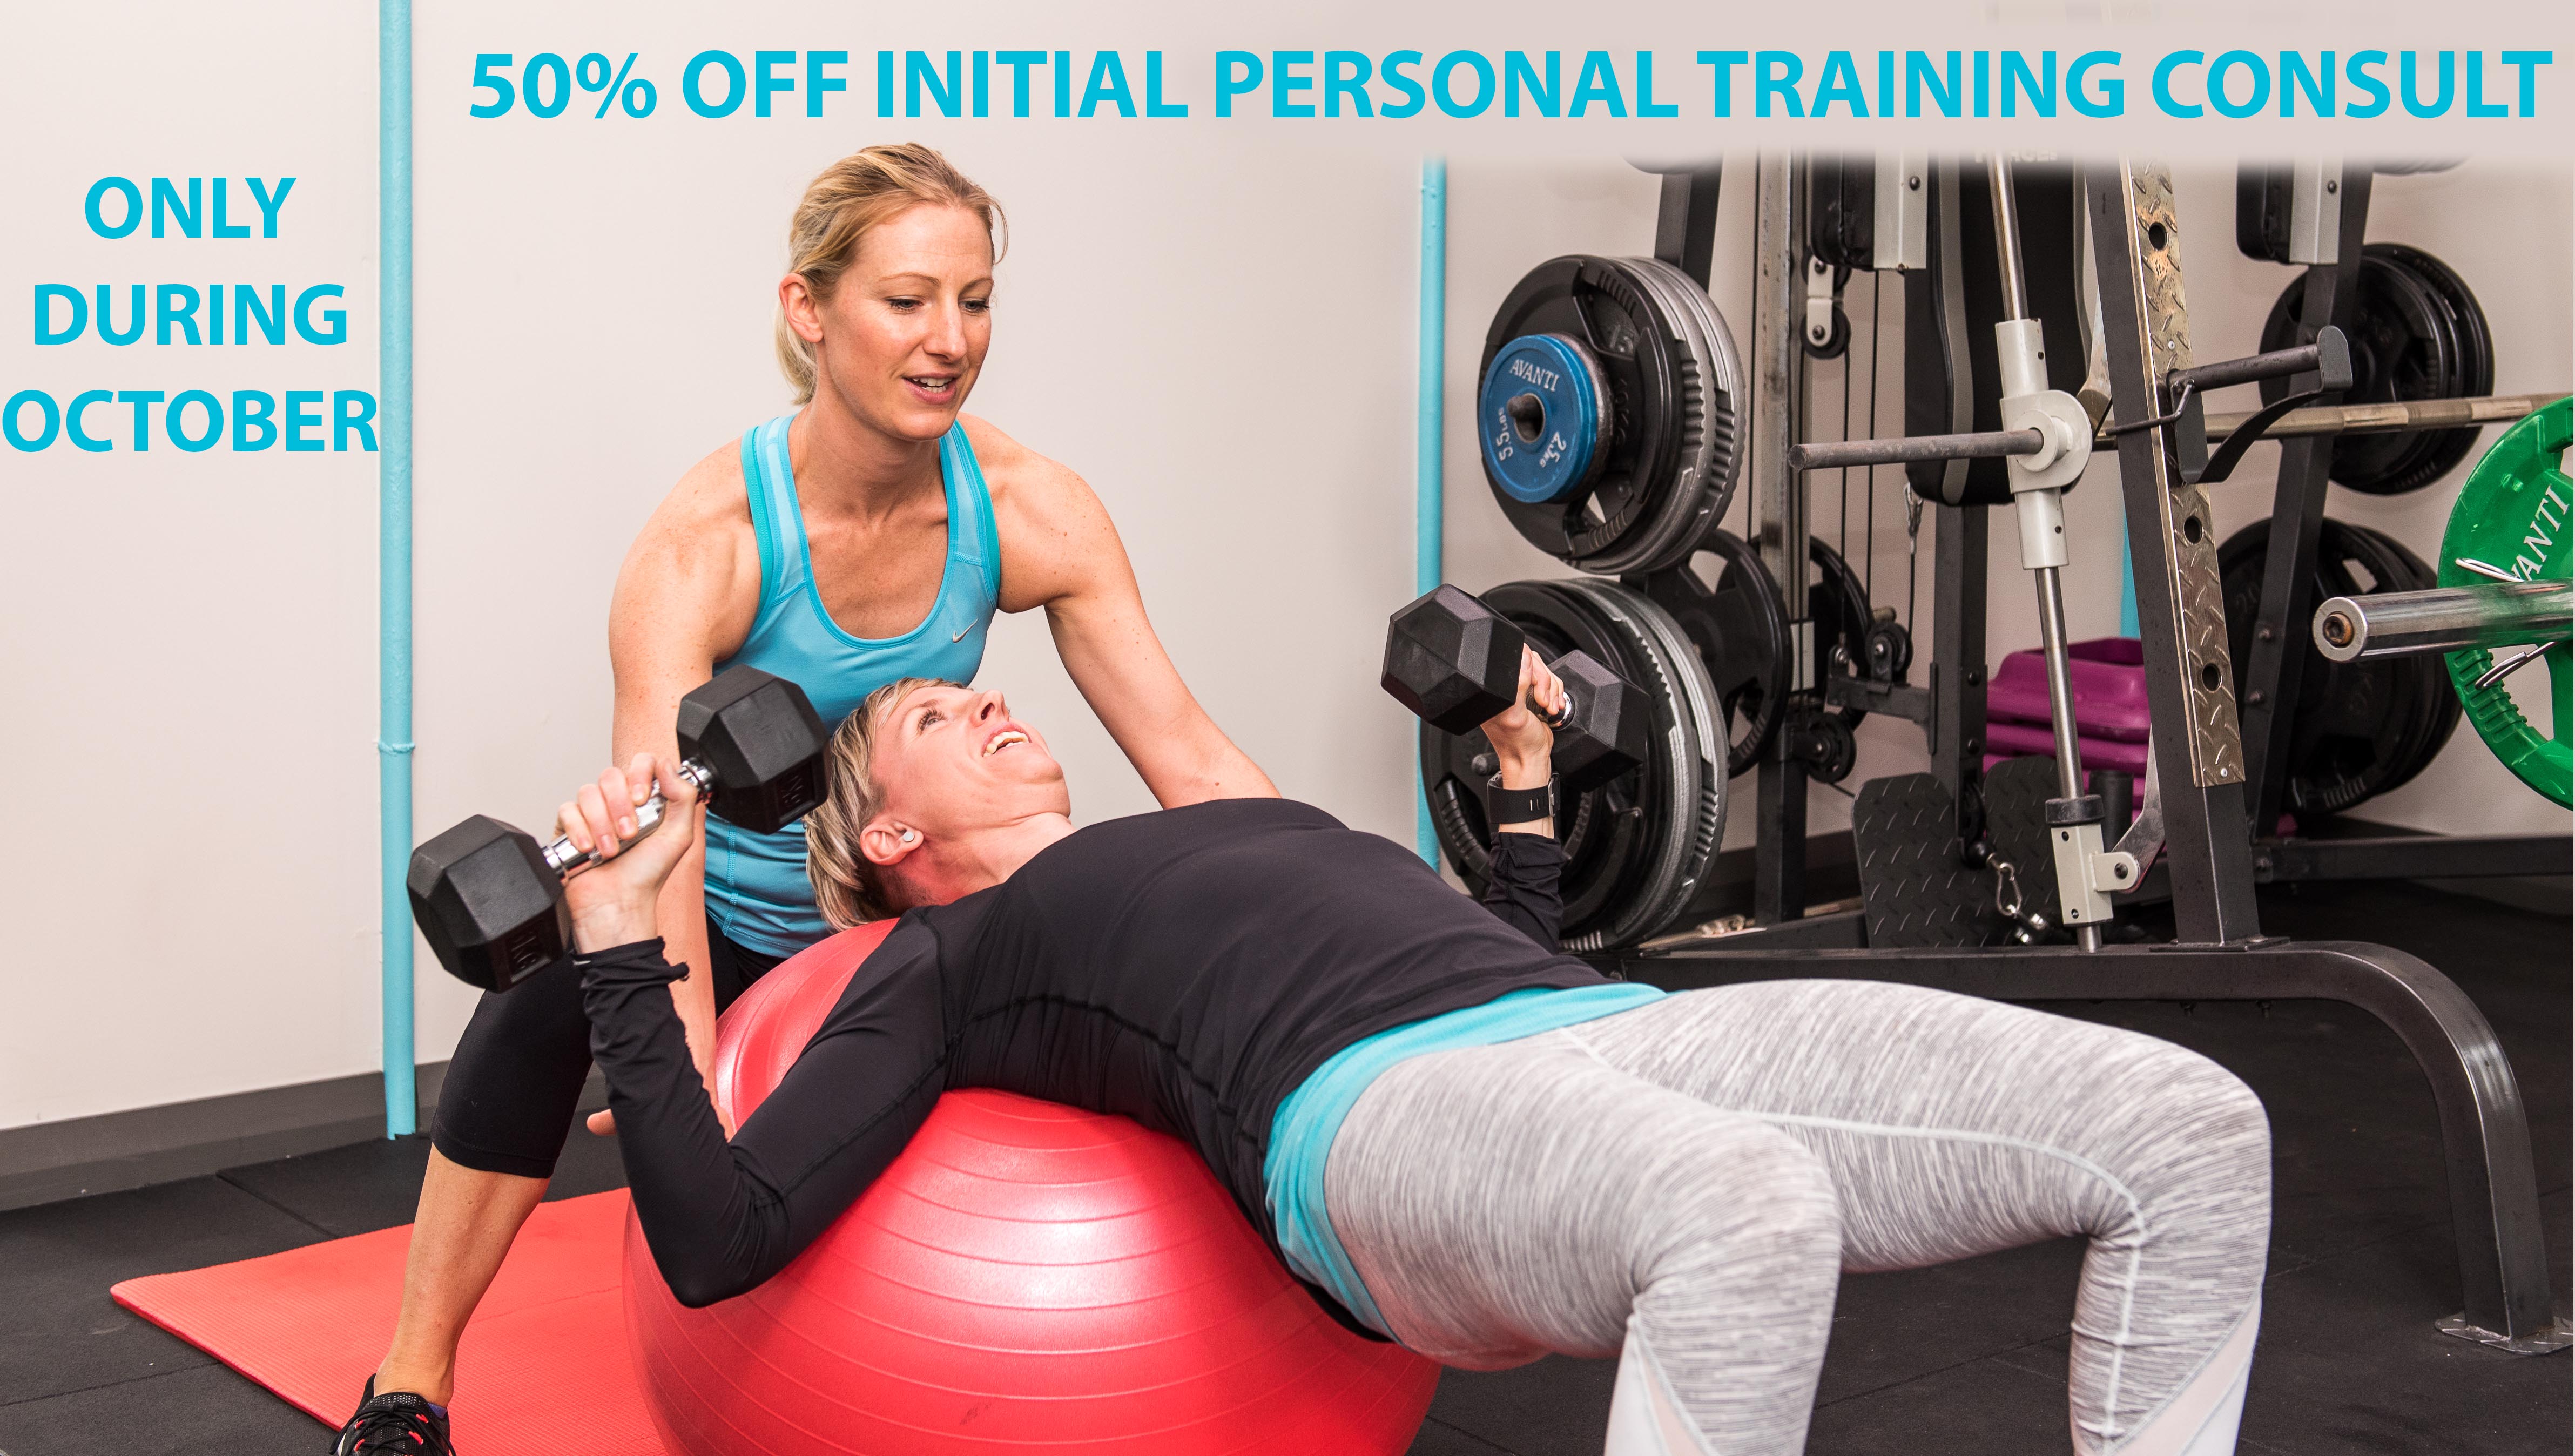 50% Off Initial Personal Training Consult